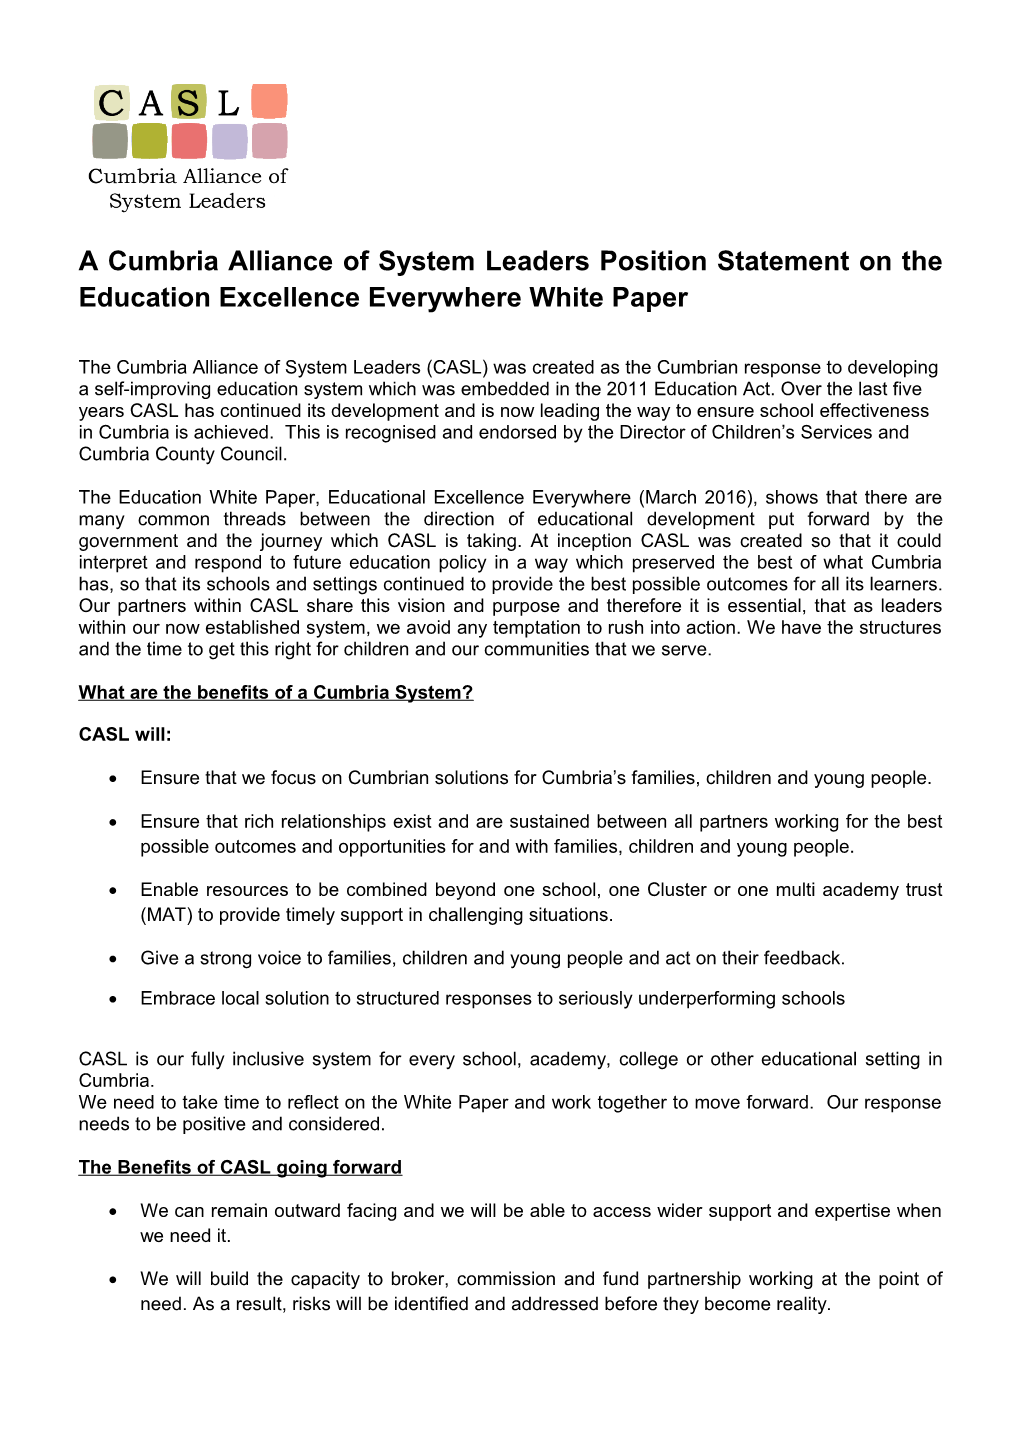 A Cumbria Alliance of System Leaders Position Statement on the Education Excellence Everywhere